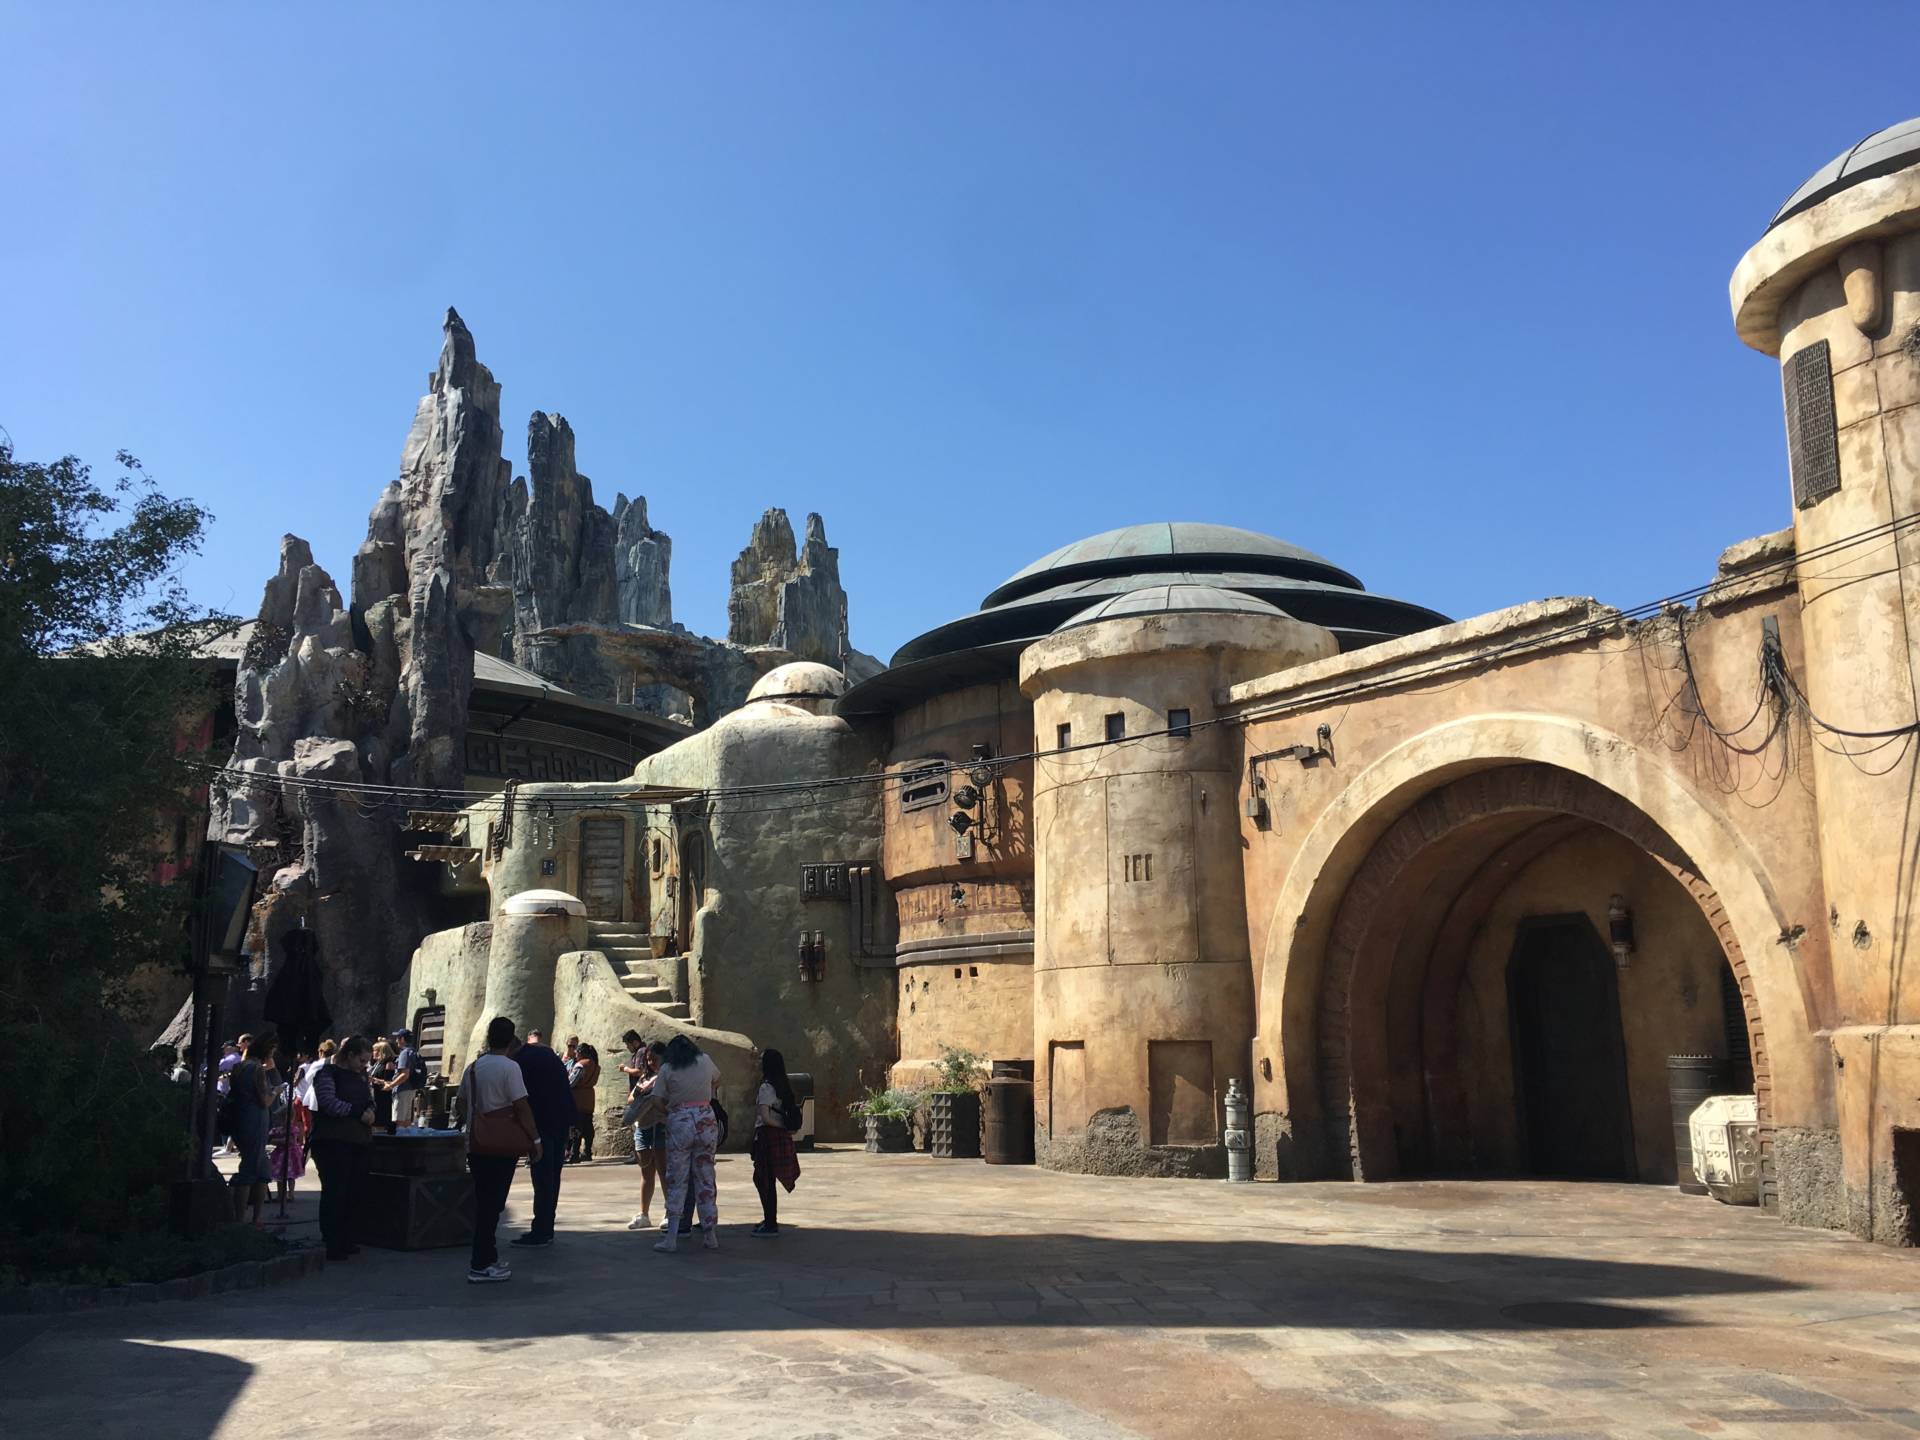 Galaxy's Edge takes place on the fictional planet of Batuu, a remote trading outpost. Michelle Wiley/KQED